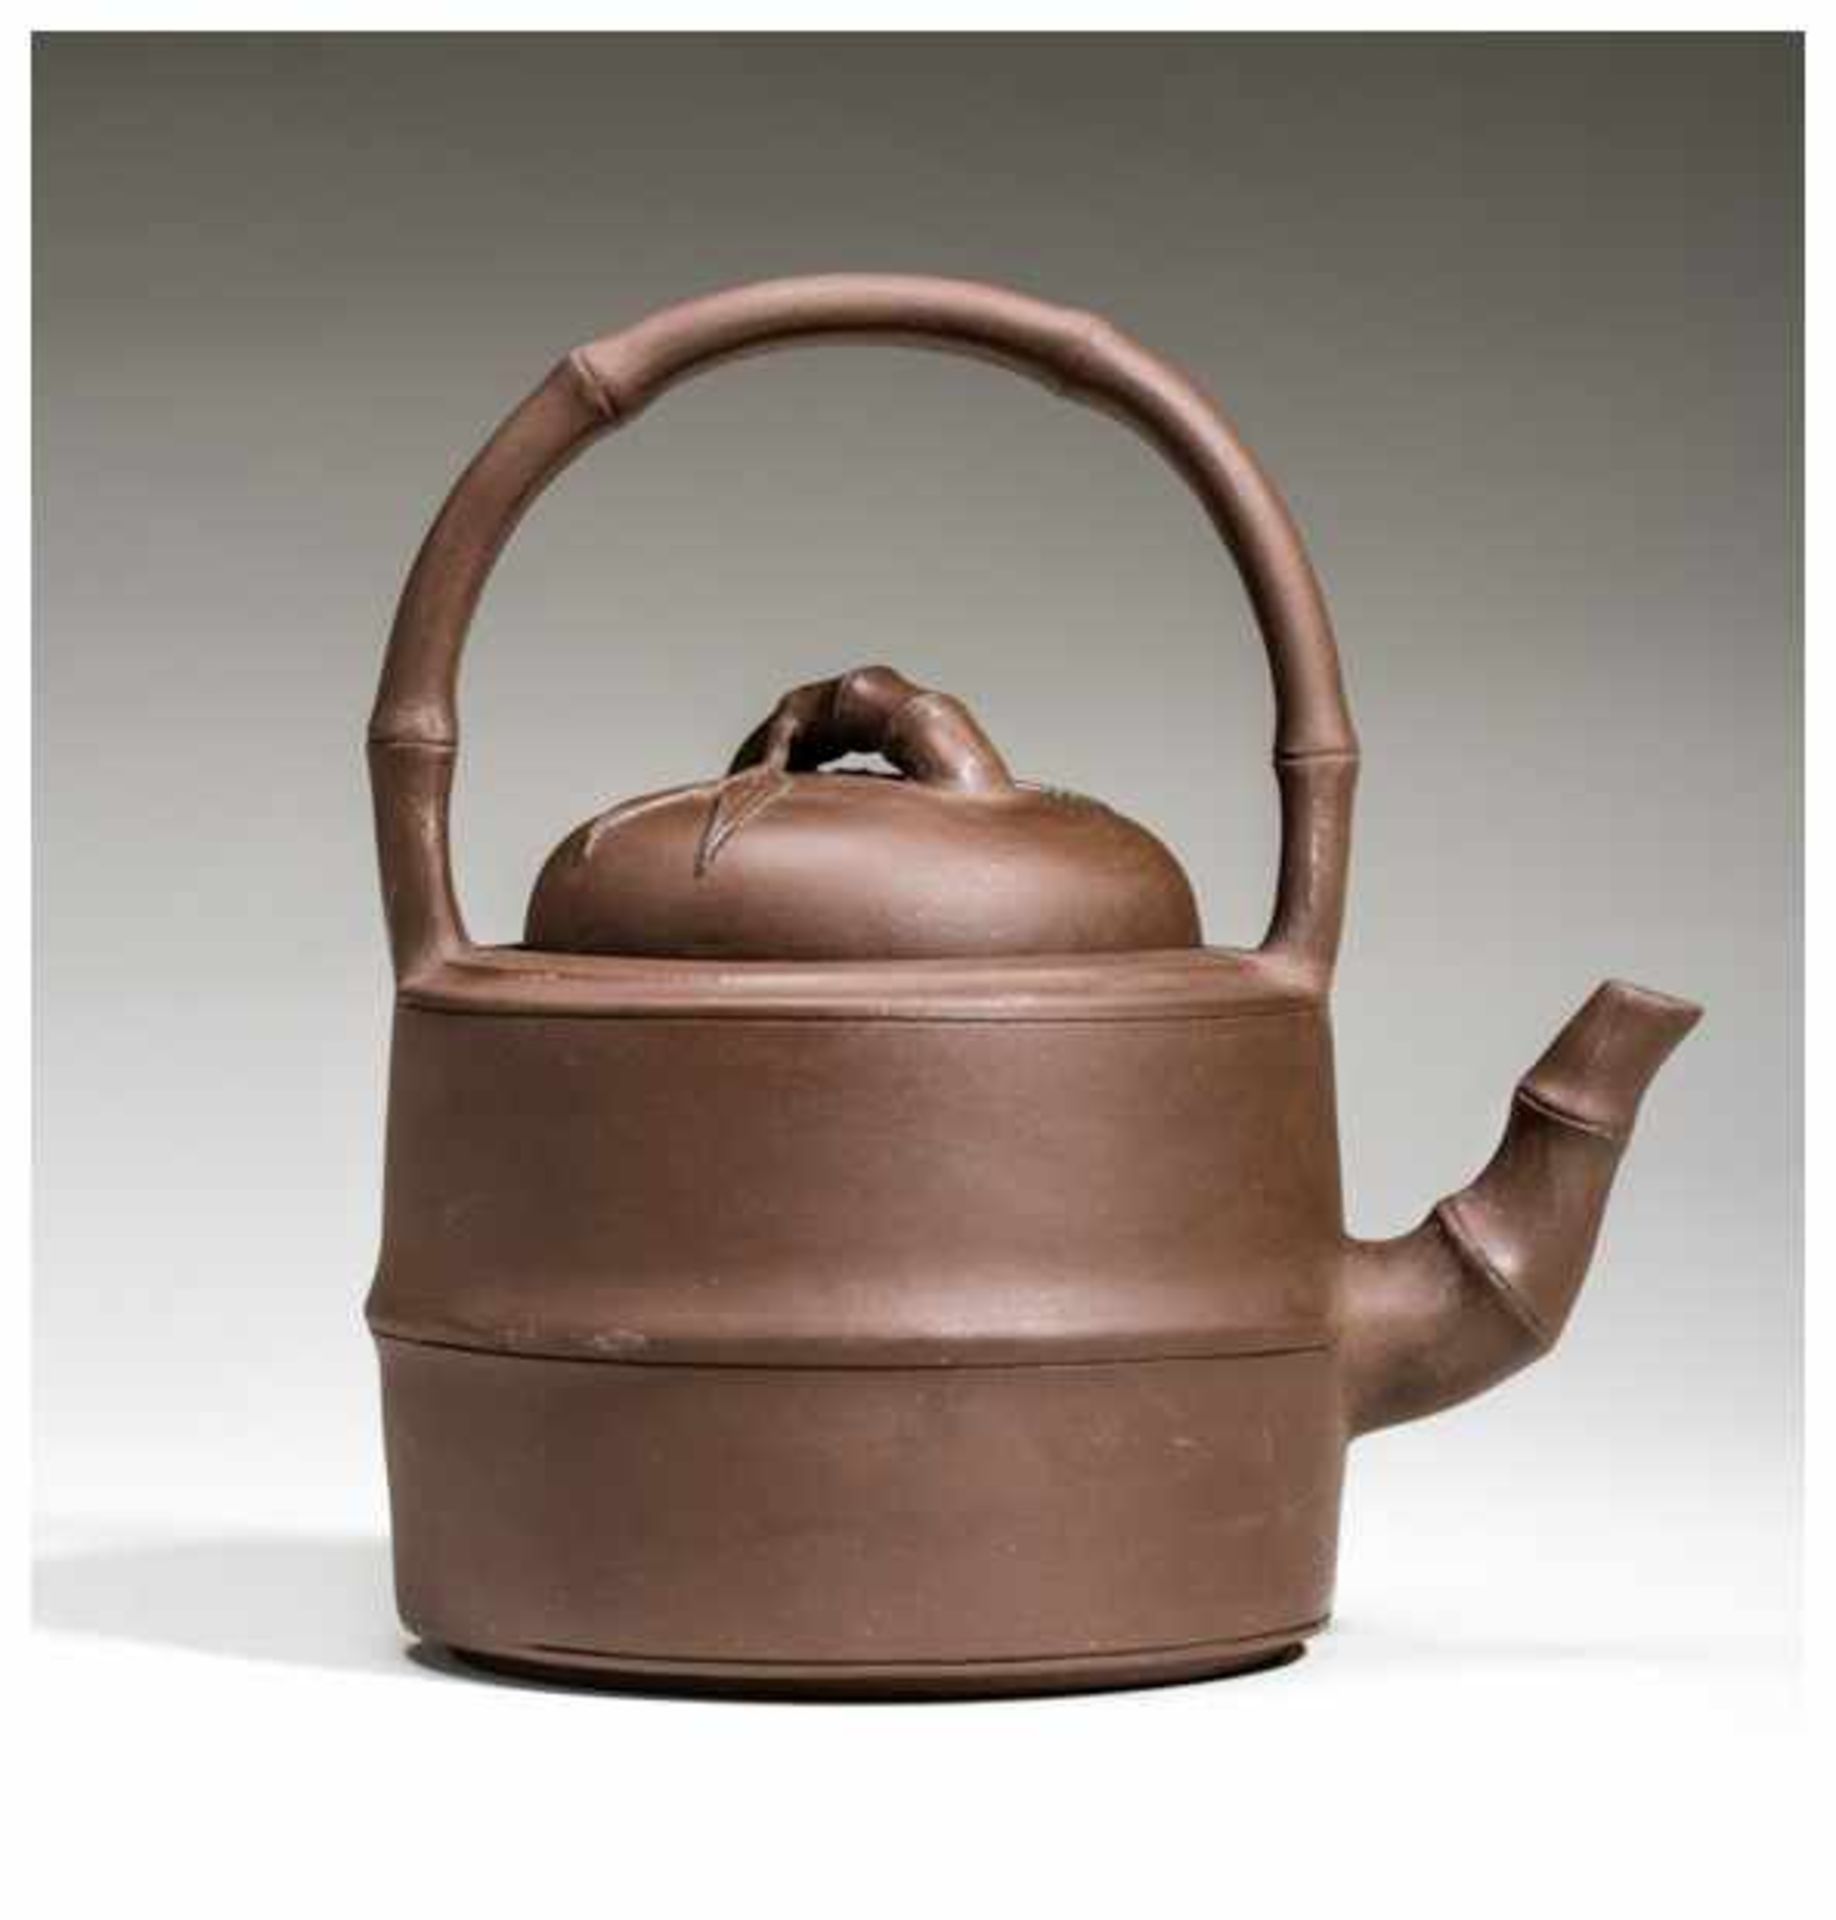 TEAPOT WITH BAMBOO Hard-fired ceramic. China, Typical, very precisely made, yixing ceramic. The - Image 2 of 7